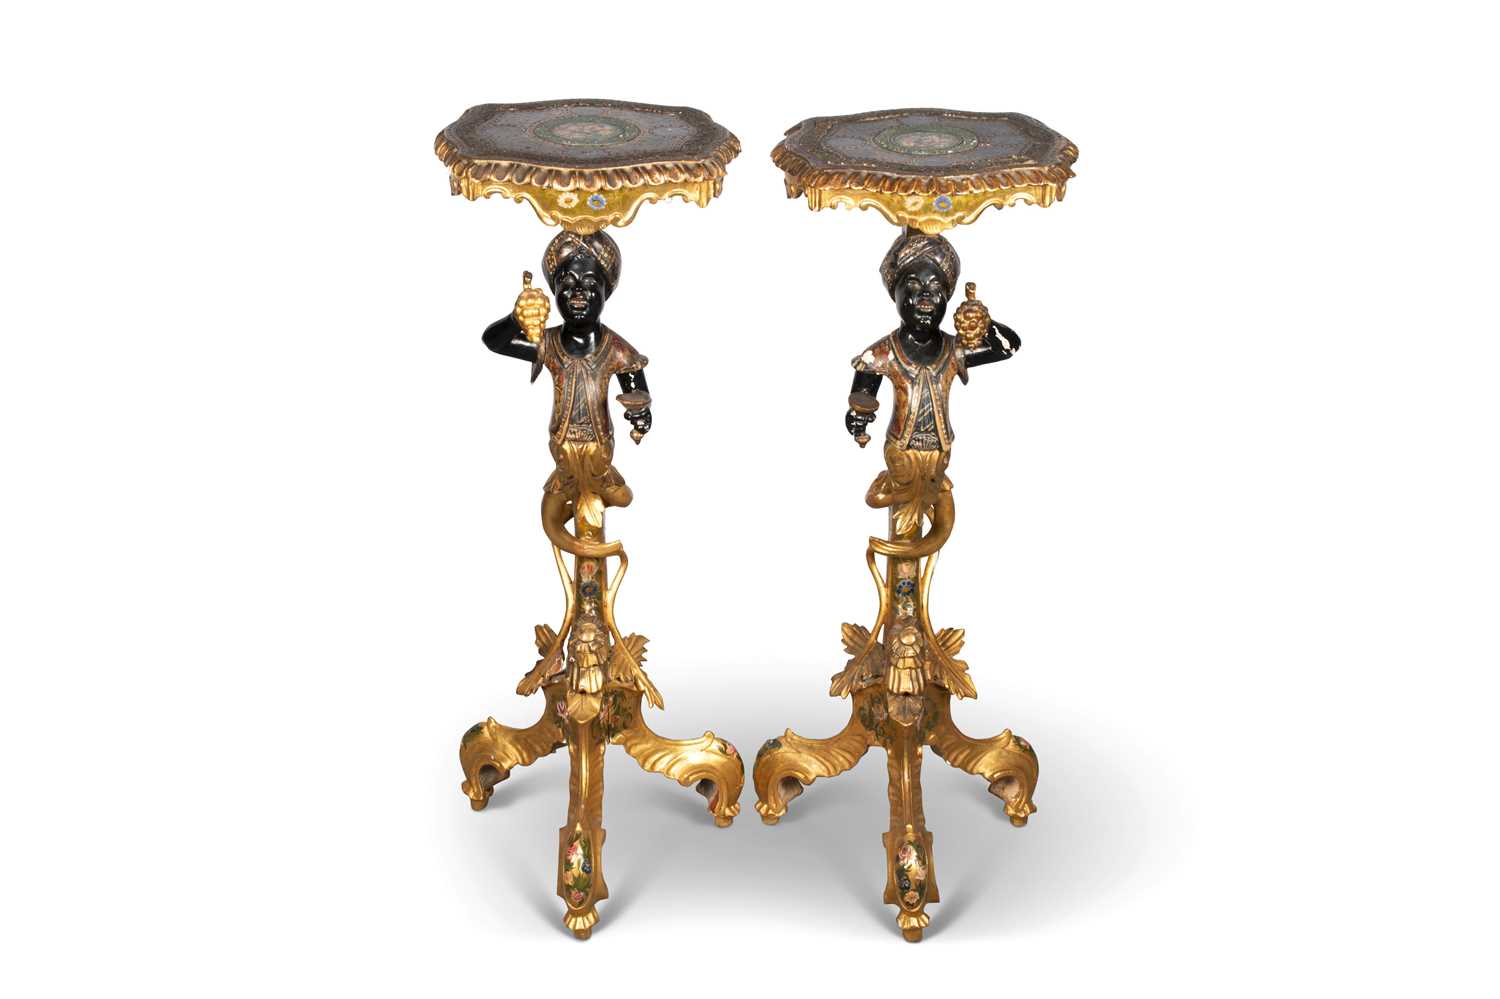 Lot 709 - A PAIR OF VENETIAN POLYCHROME AND GILDED, CARVED BLACKAMOOR GUERIDONS, 19TH CENTURY